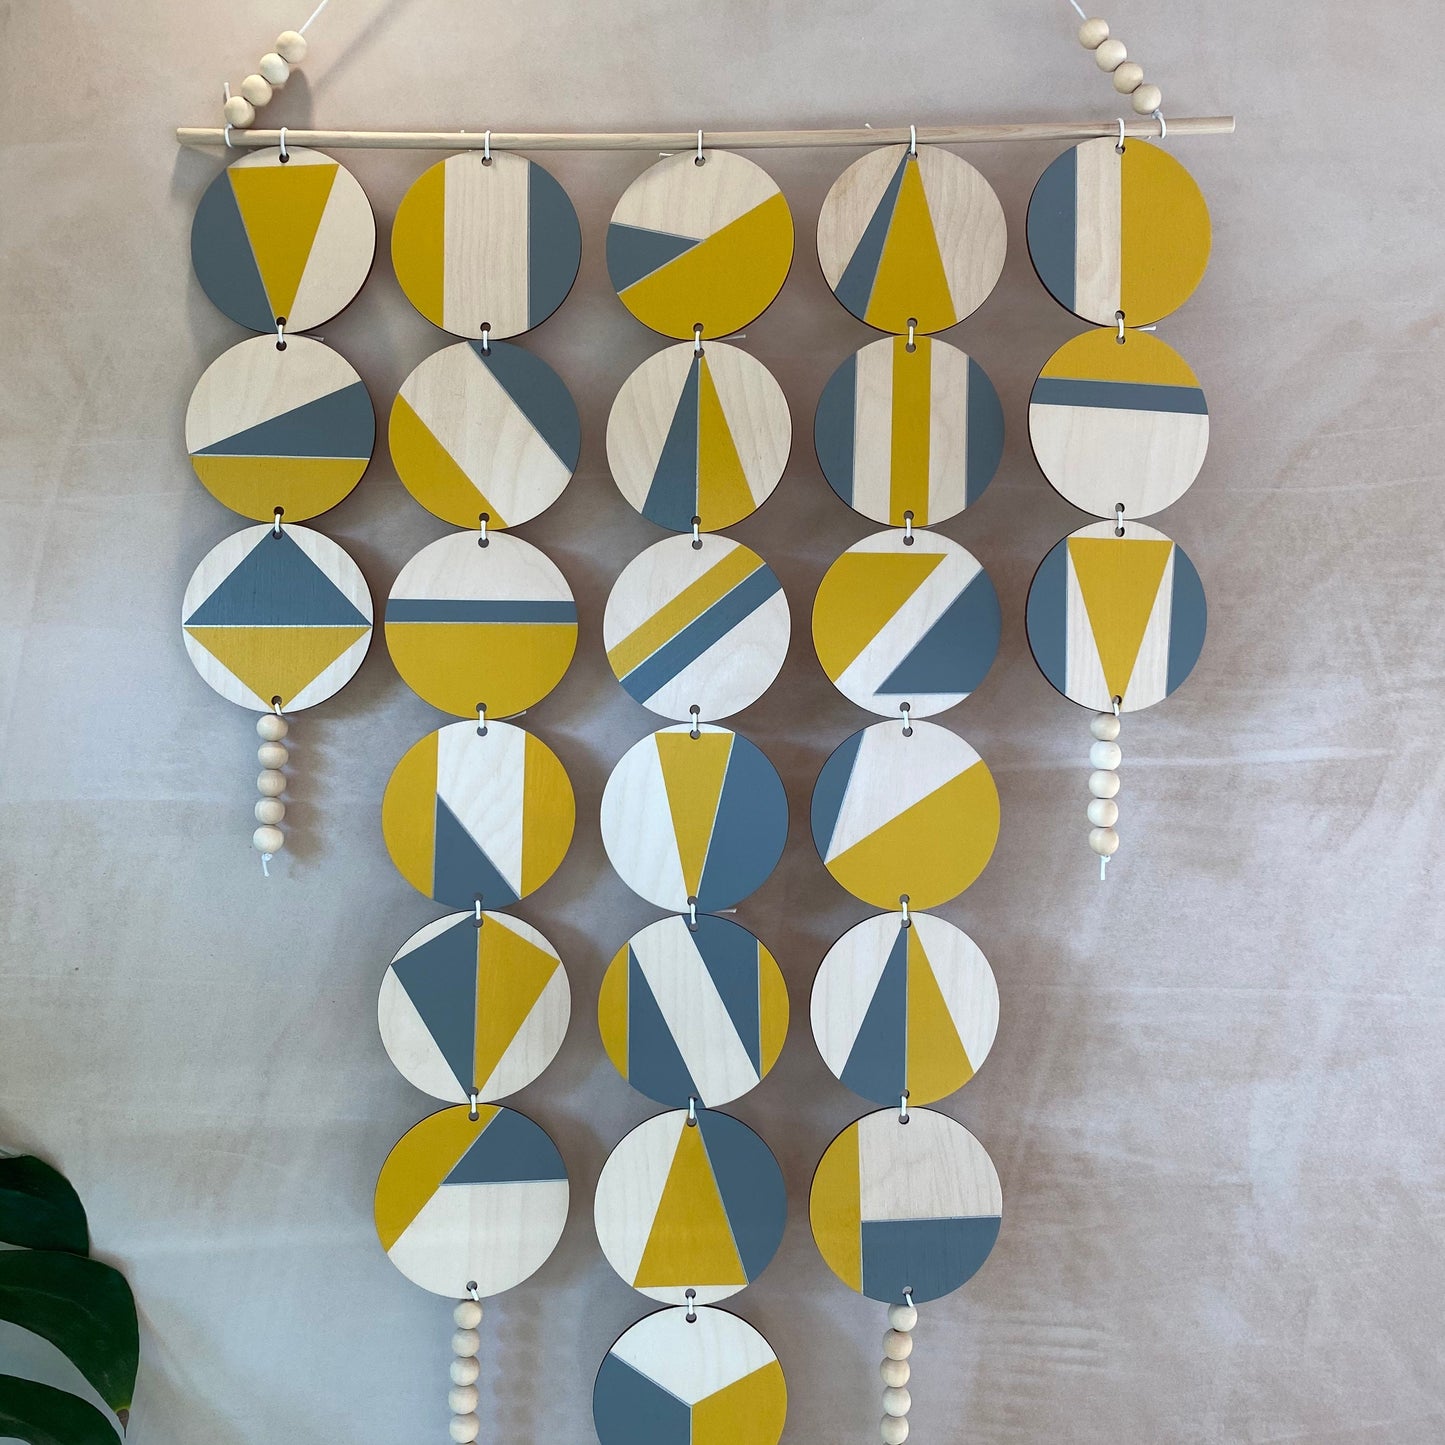 Large Chandelier Wall Hanging - Wall Hanging - Yellow and Grey Geometric Art - Scandi Wall Decor - Home Wall Decor - Big Wall Tapestry